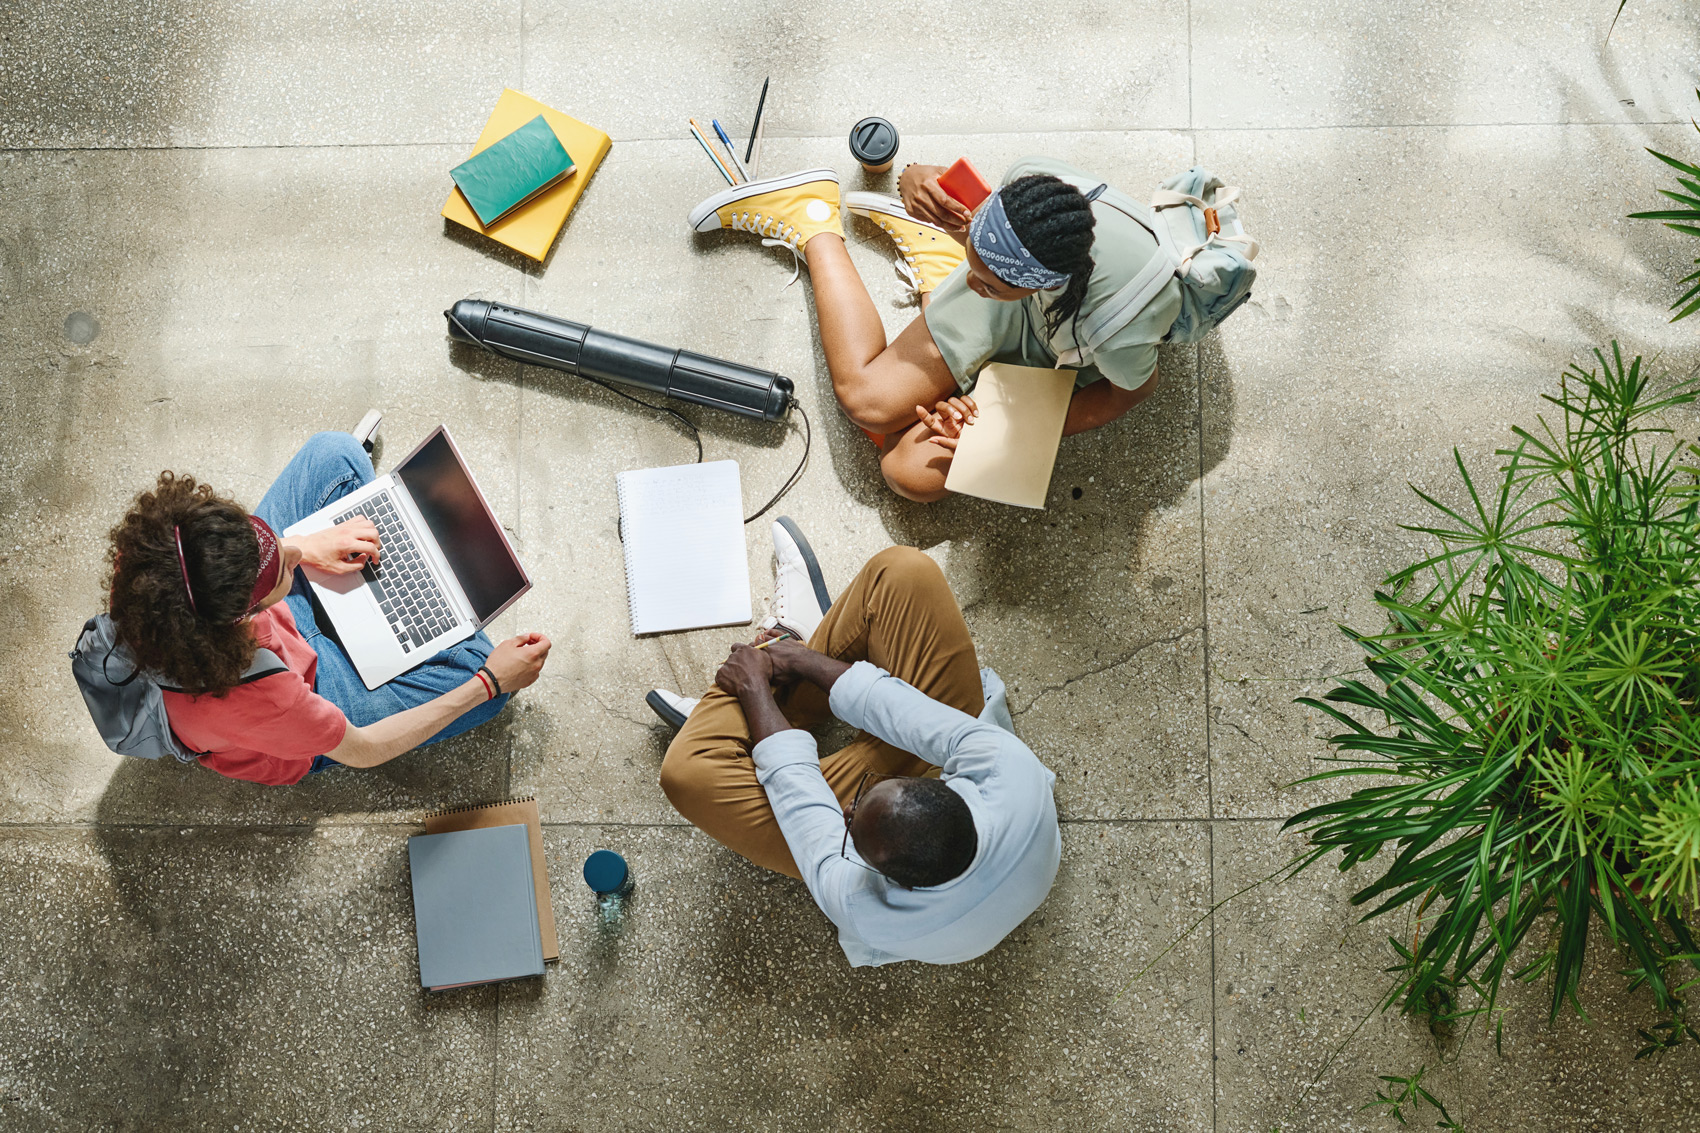 College Students Sitting on Floor With Laptop And Books - Latest Employee Trends 